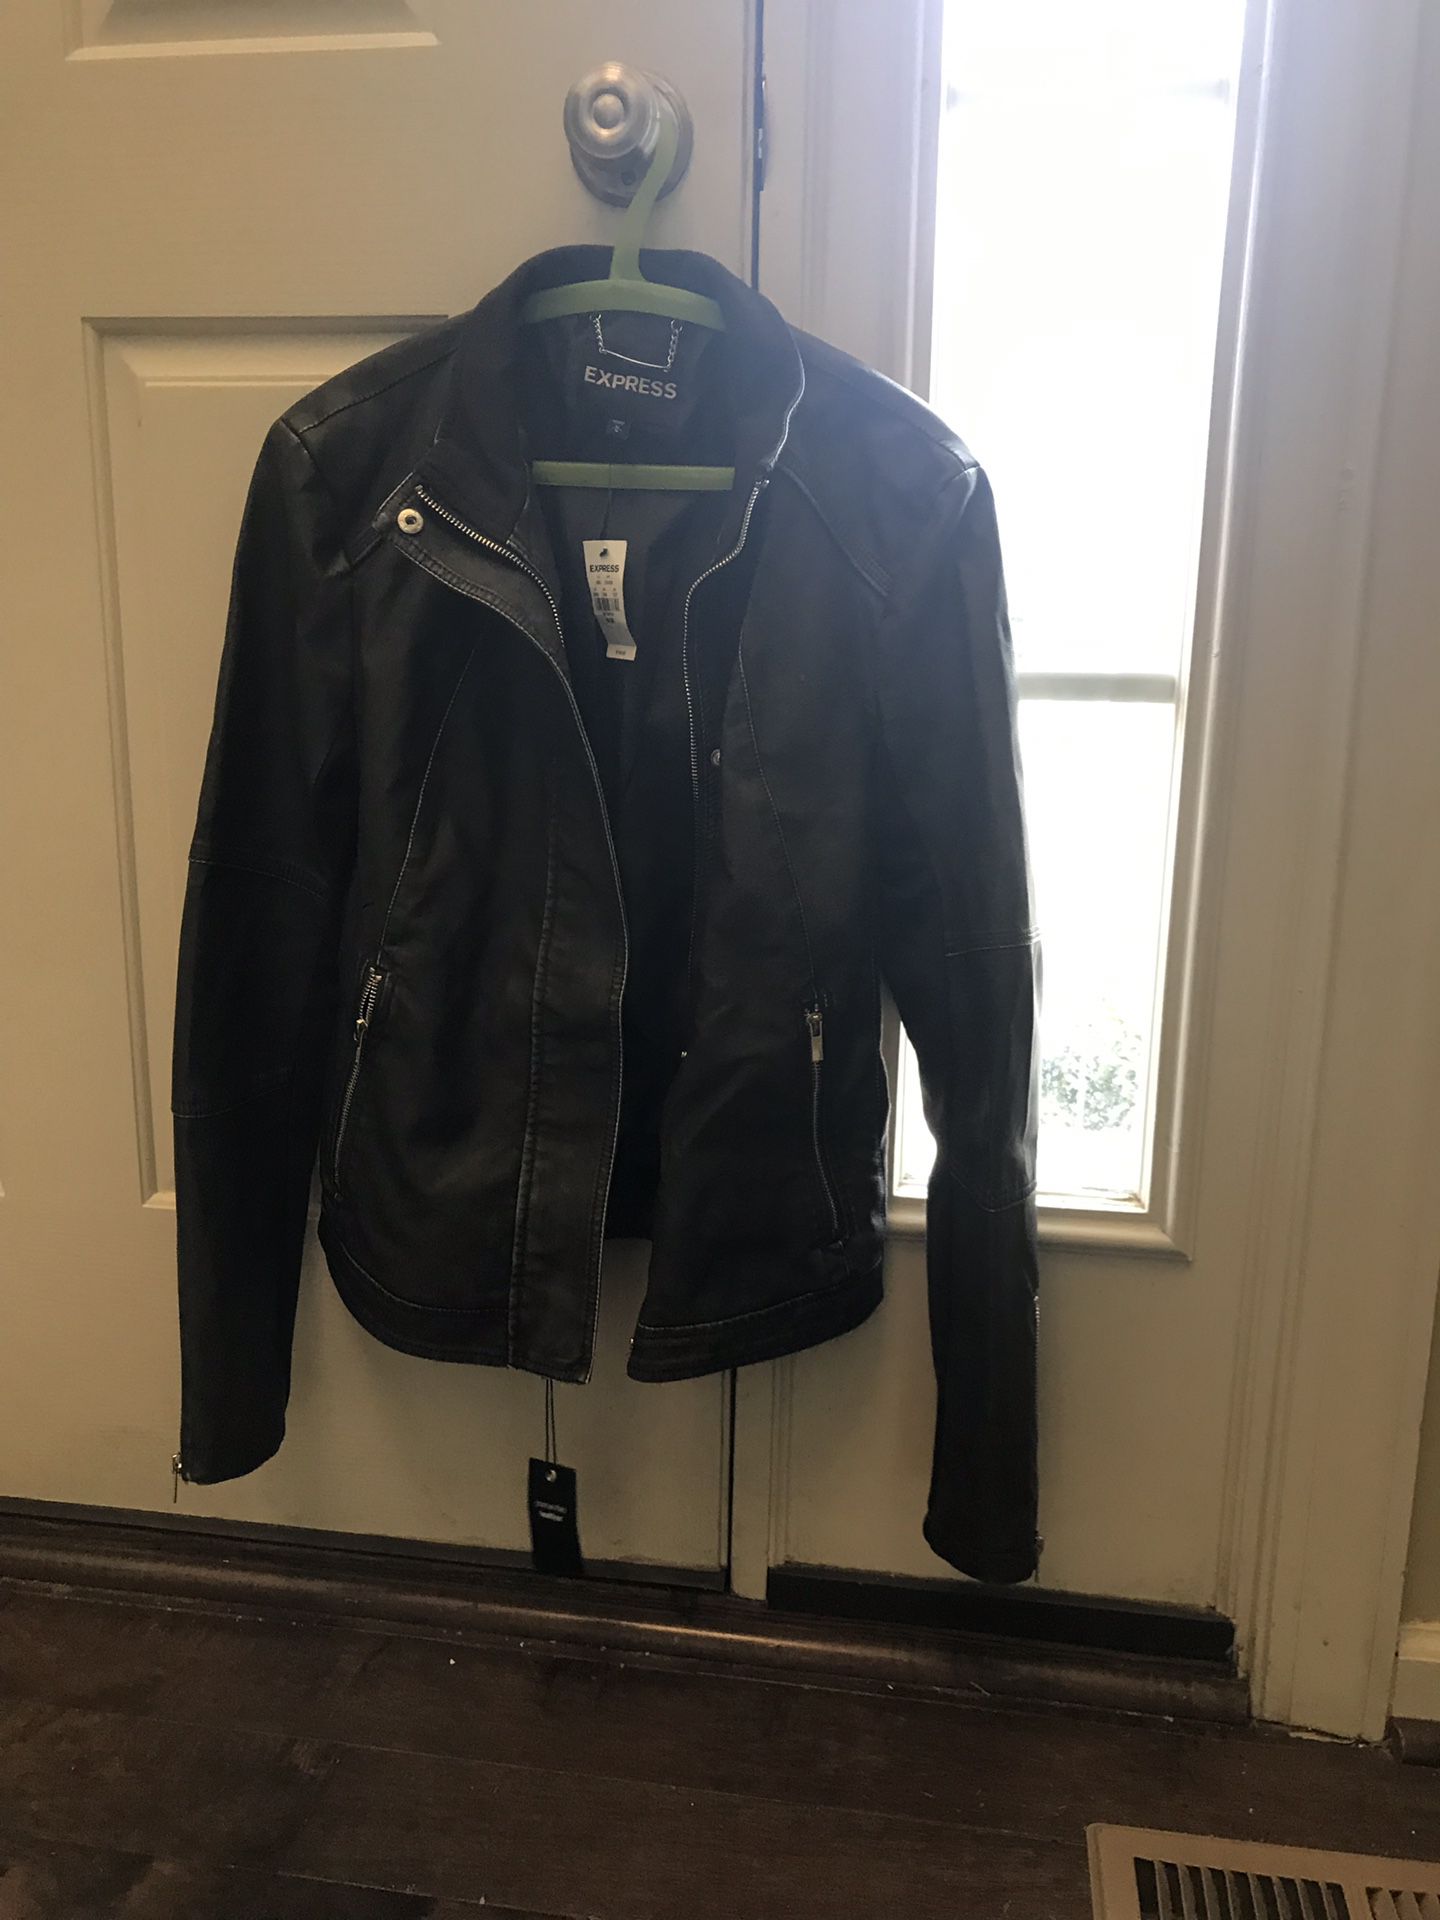 Woman’s “Leather” Jacket - Express Brand -Size M/M